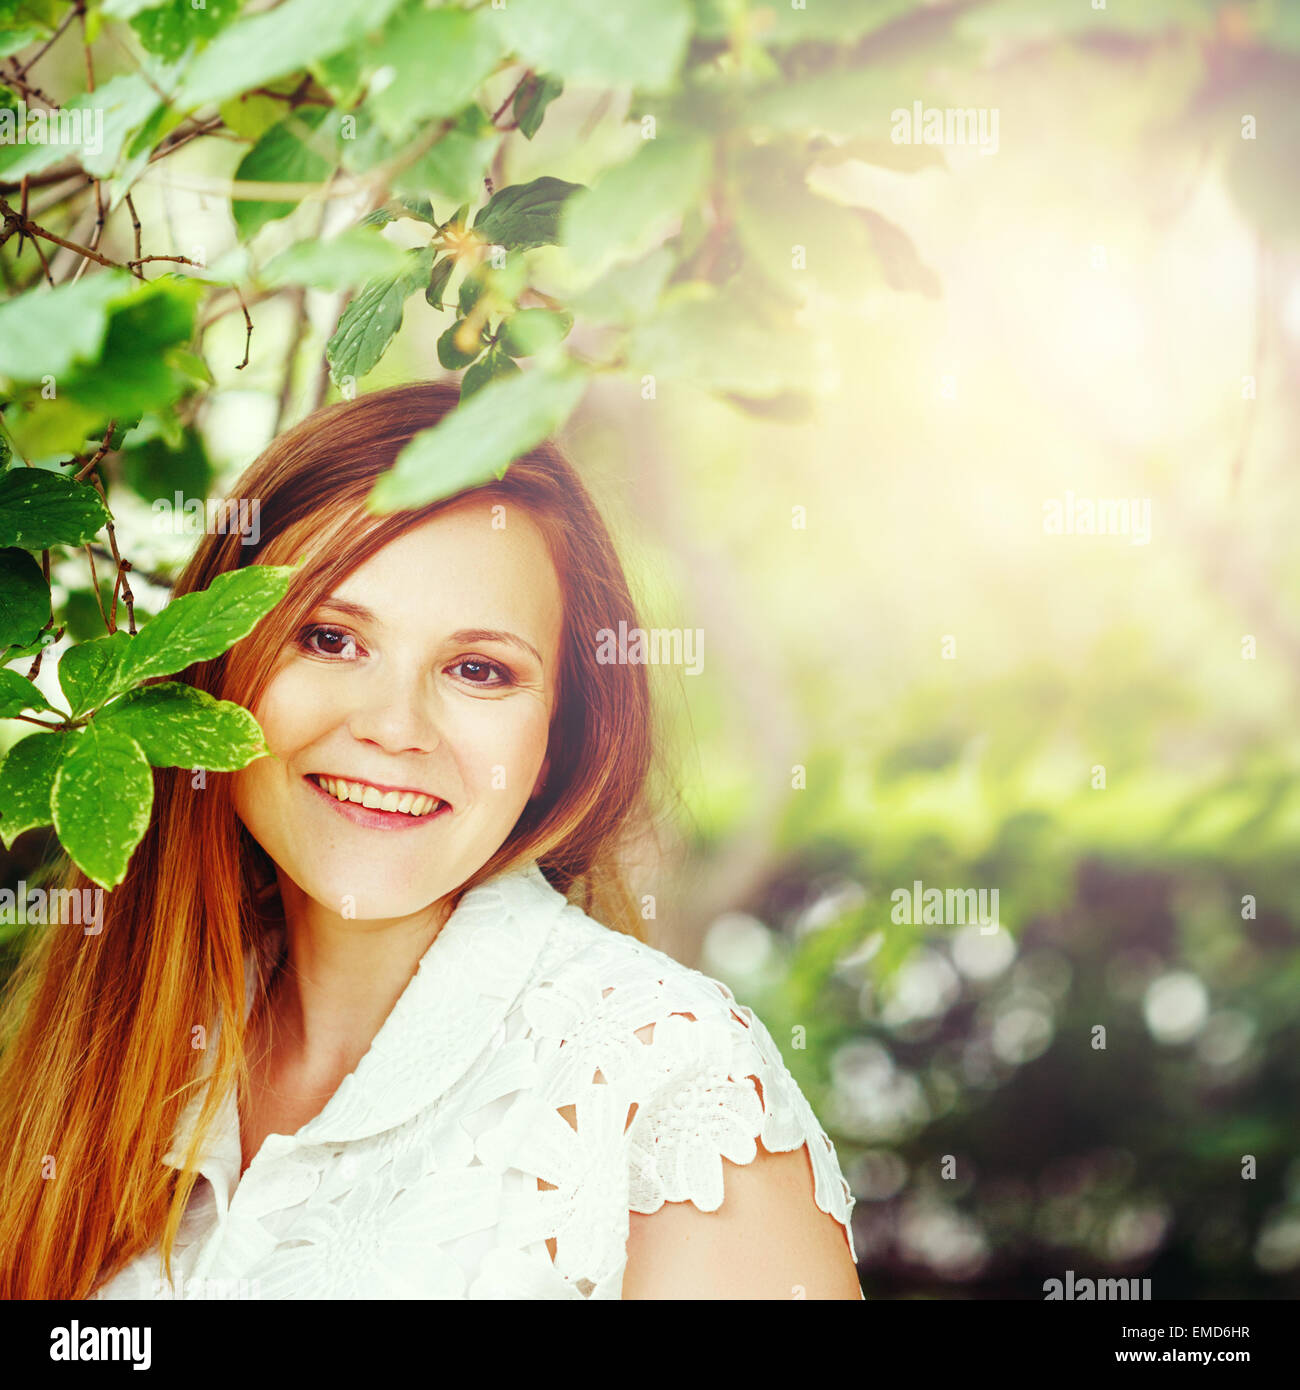 Beautiful Red Hair Woman smiling against the Nature Green Background. Summer relaxation. Image toned with Cyan Colors. Stock Photo